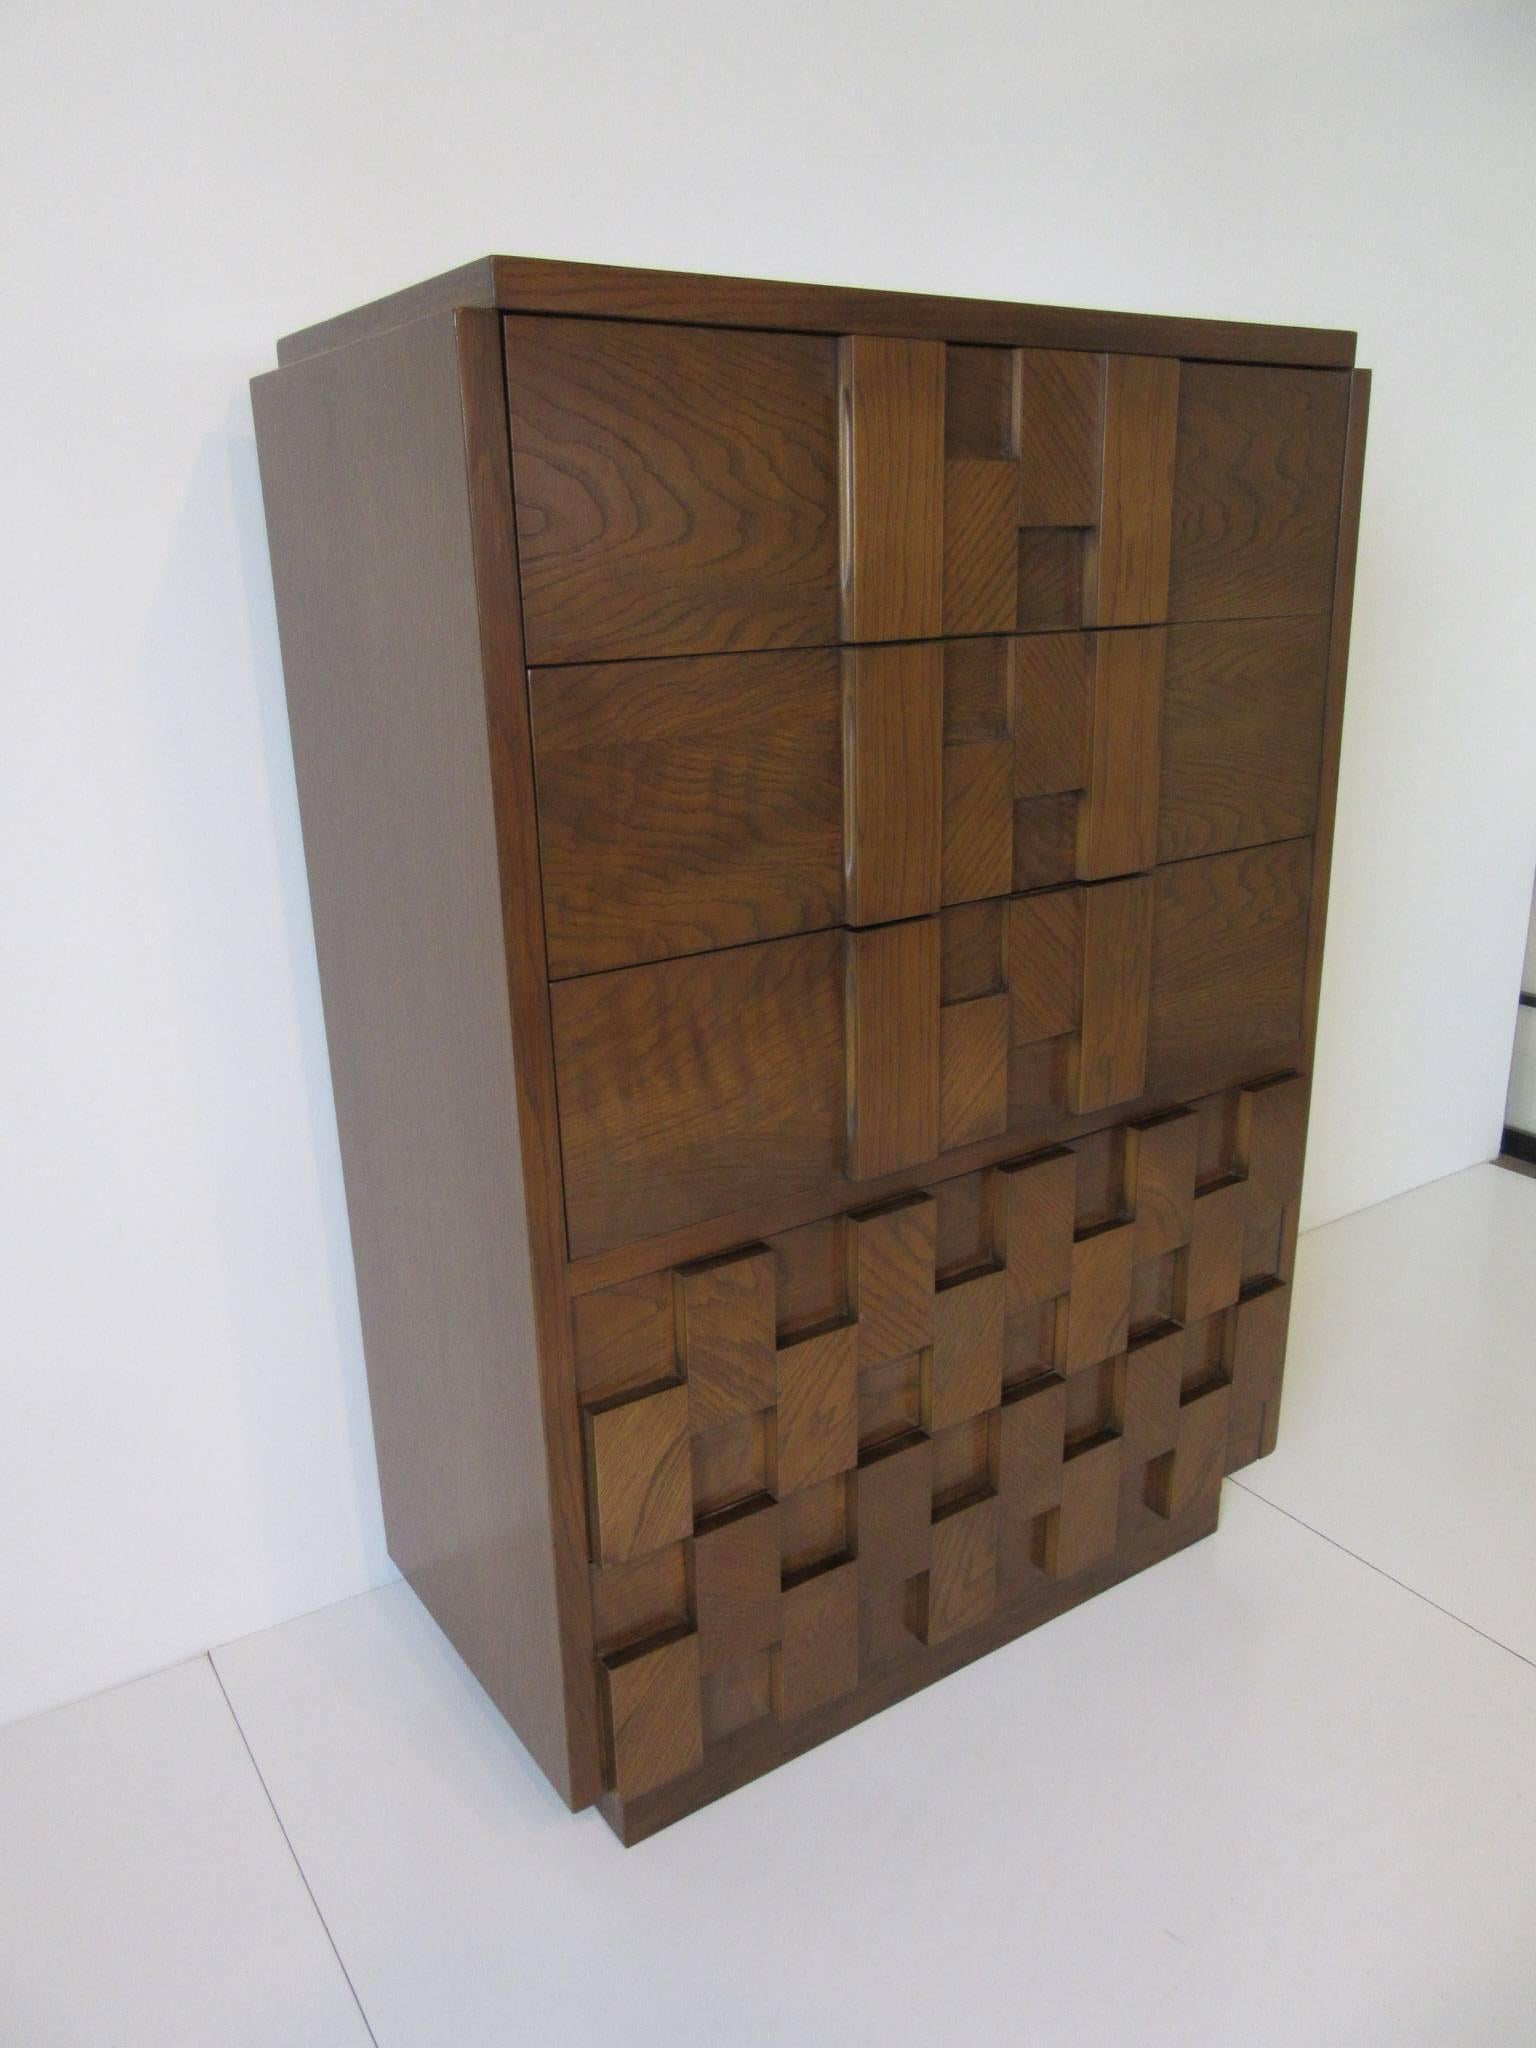 A medium toned Brutalist styled tall dresser or chest with five drawers with block design in the manner of Paul Evans, manufactured by Lane for their Altavista collection.